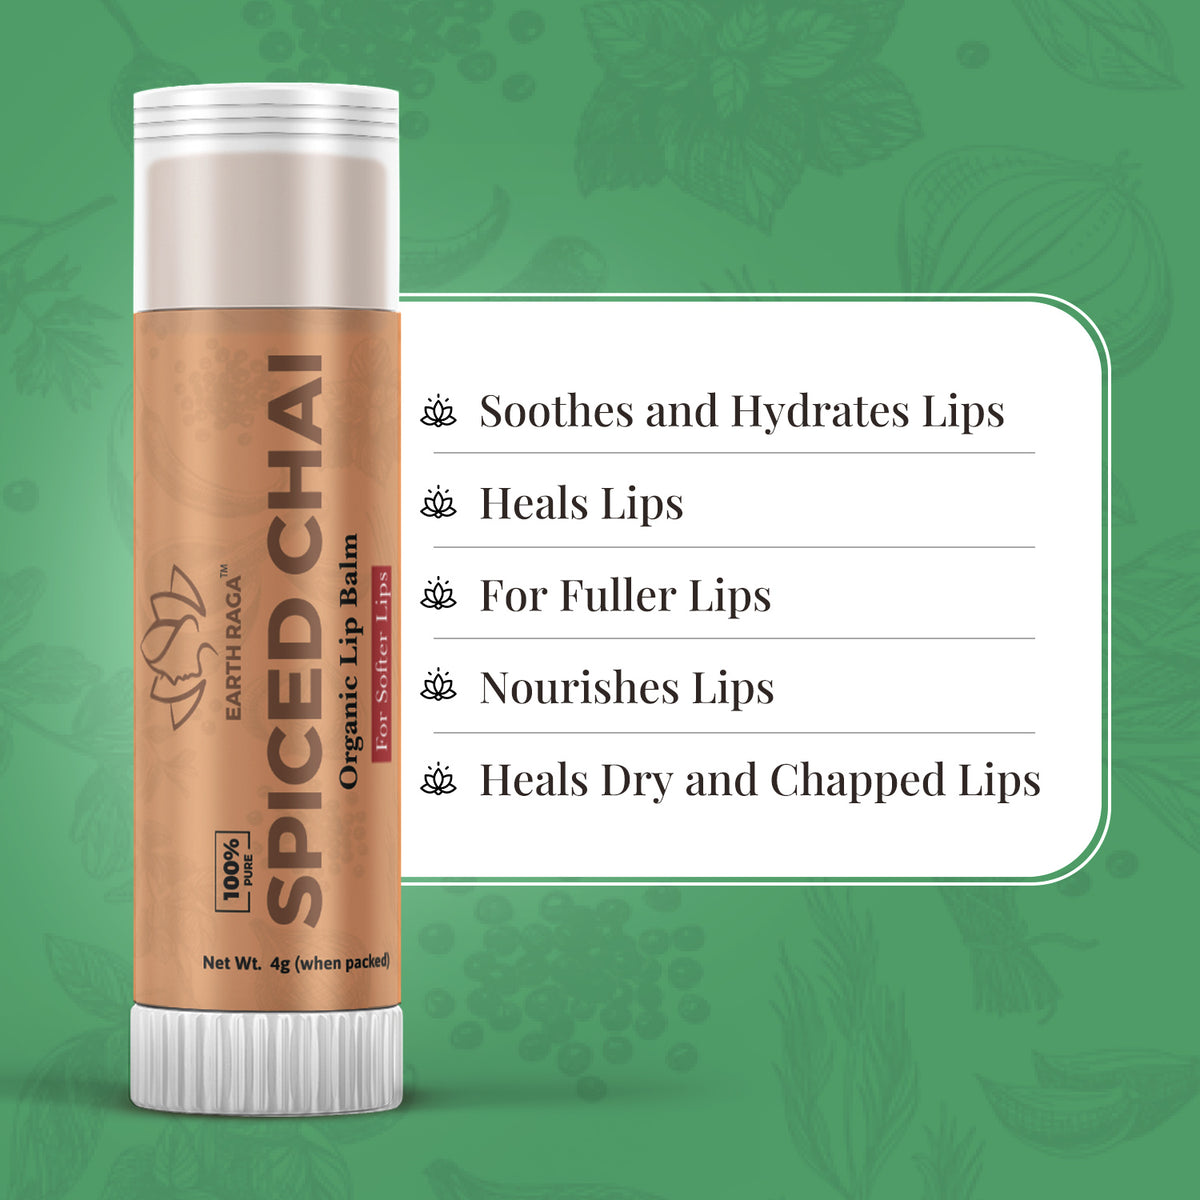 Spiced Chai Organic Lip Balm 4g | Locks Moisture In Lips | Soothes Chapped Lips | Heals Damaged Lips| Enriched With Antioxidants